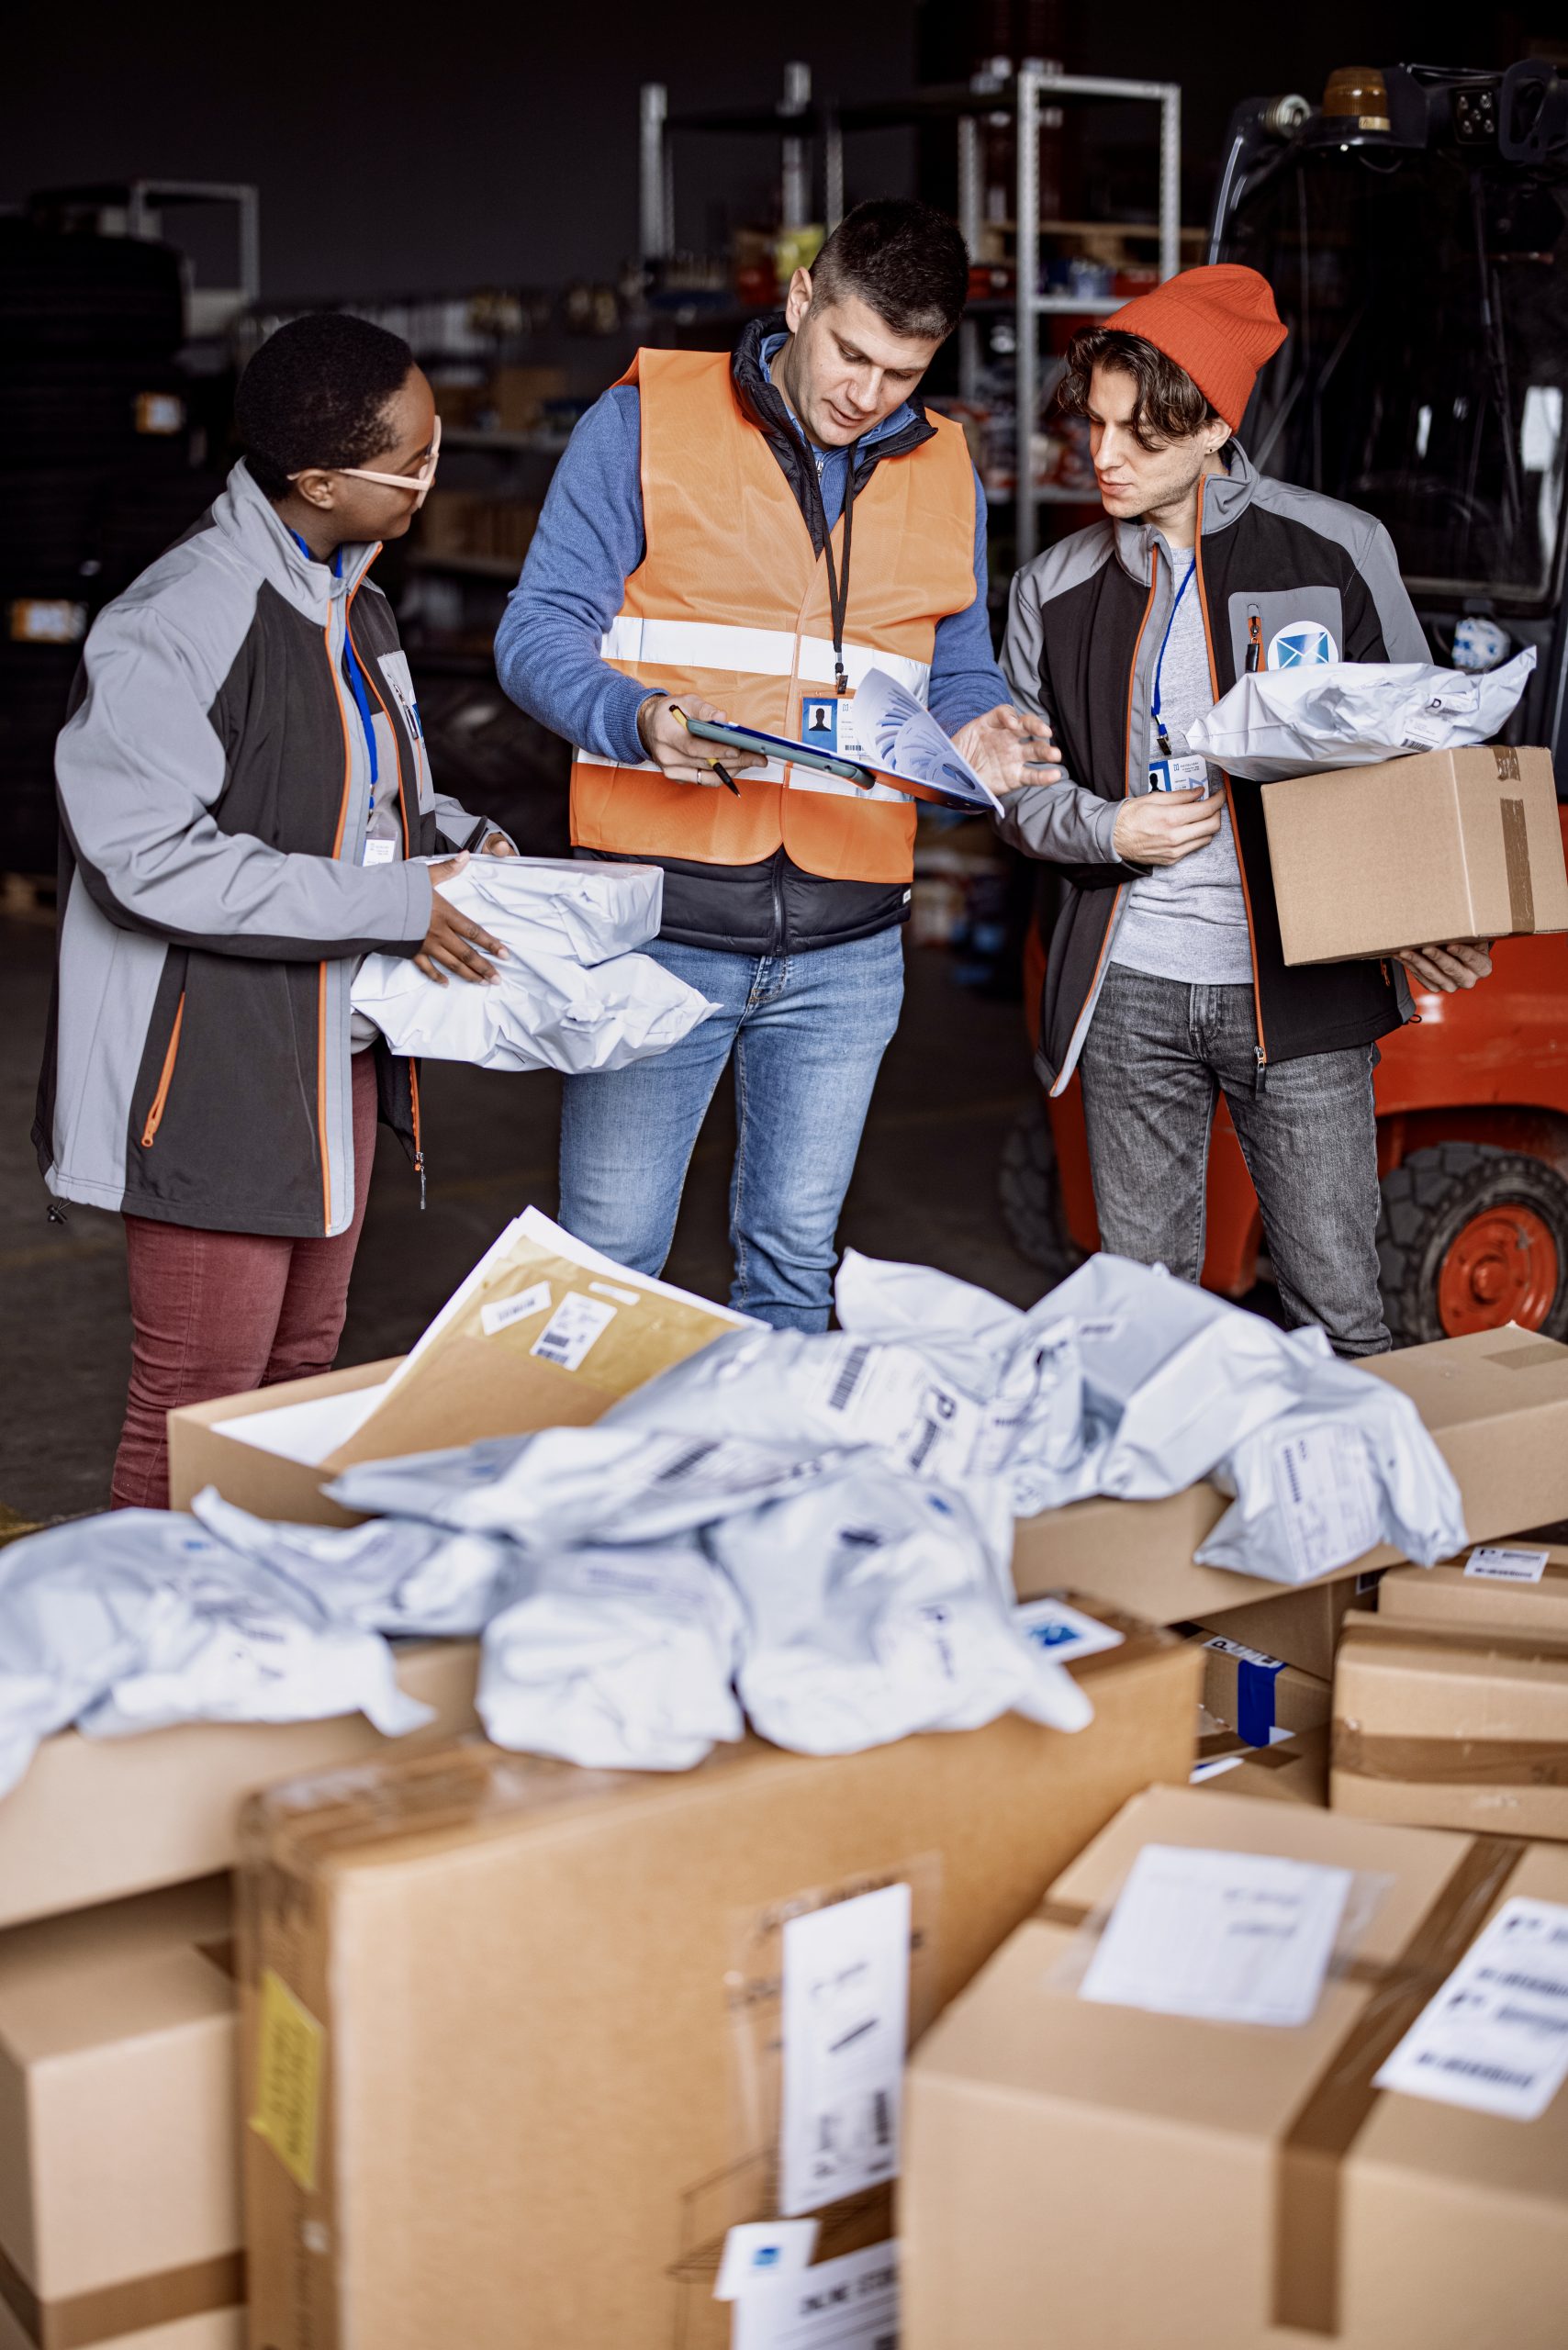 Delivery employees preparing their parcel for dispatch at warehouse